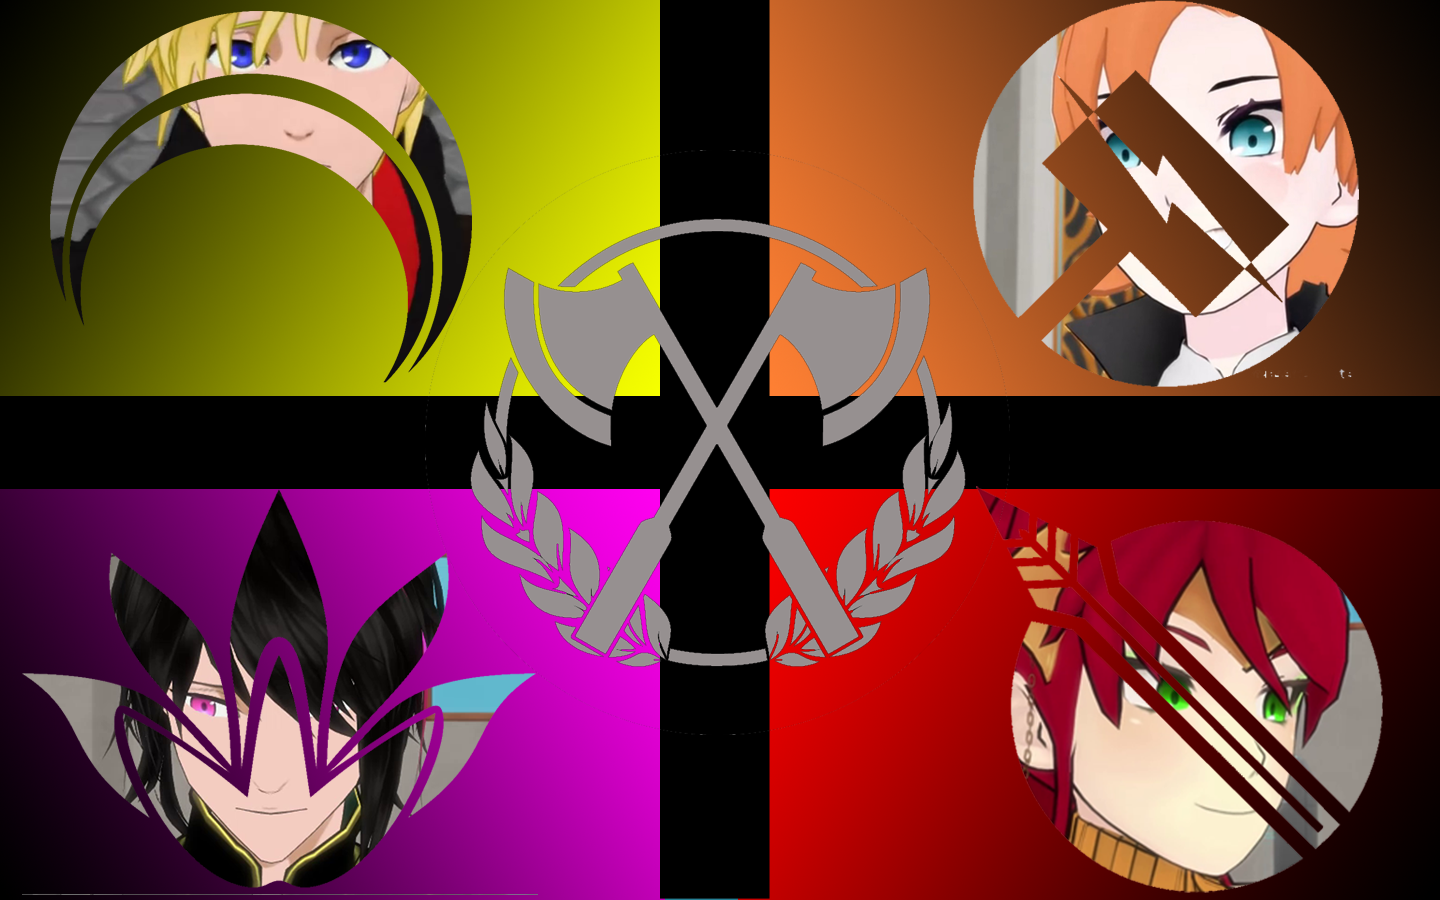 I made another wallpaper for team JNPR